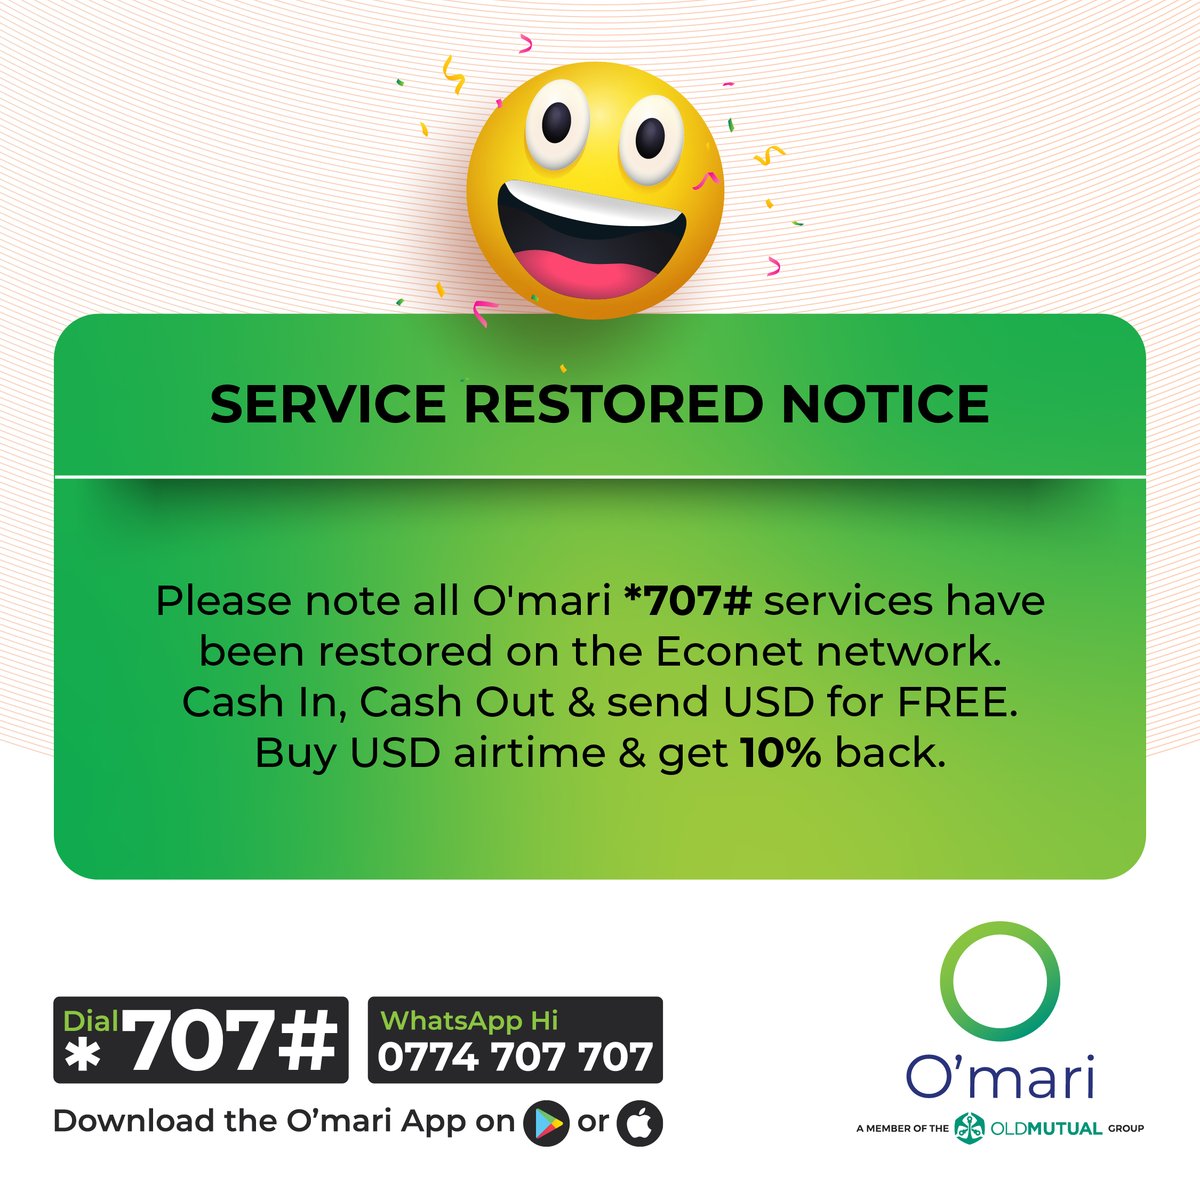 Dear customers, please note that all O'mari *707# services have been restored on the Econet network. You can now Cash In, Cash Out & send USD for FREE, buy USD Econet and NetOne airtime & get 10% back. Simply dial *707# to transact on O’mari! #convenience #jointhecircle